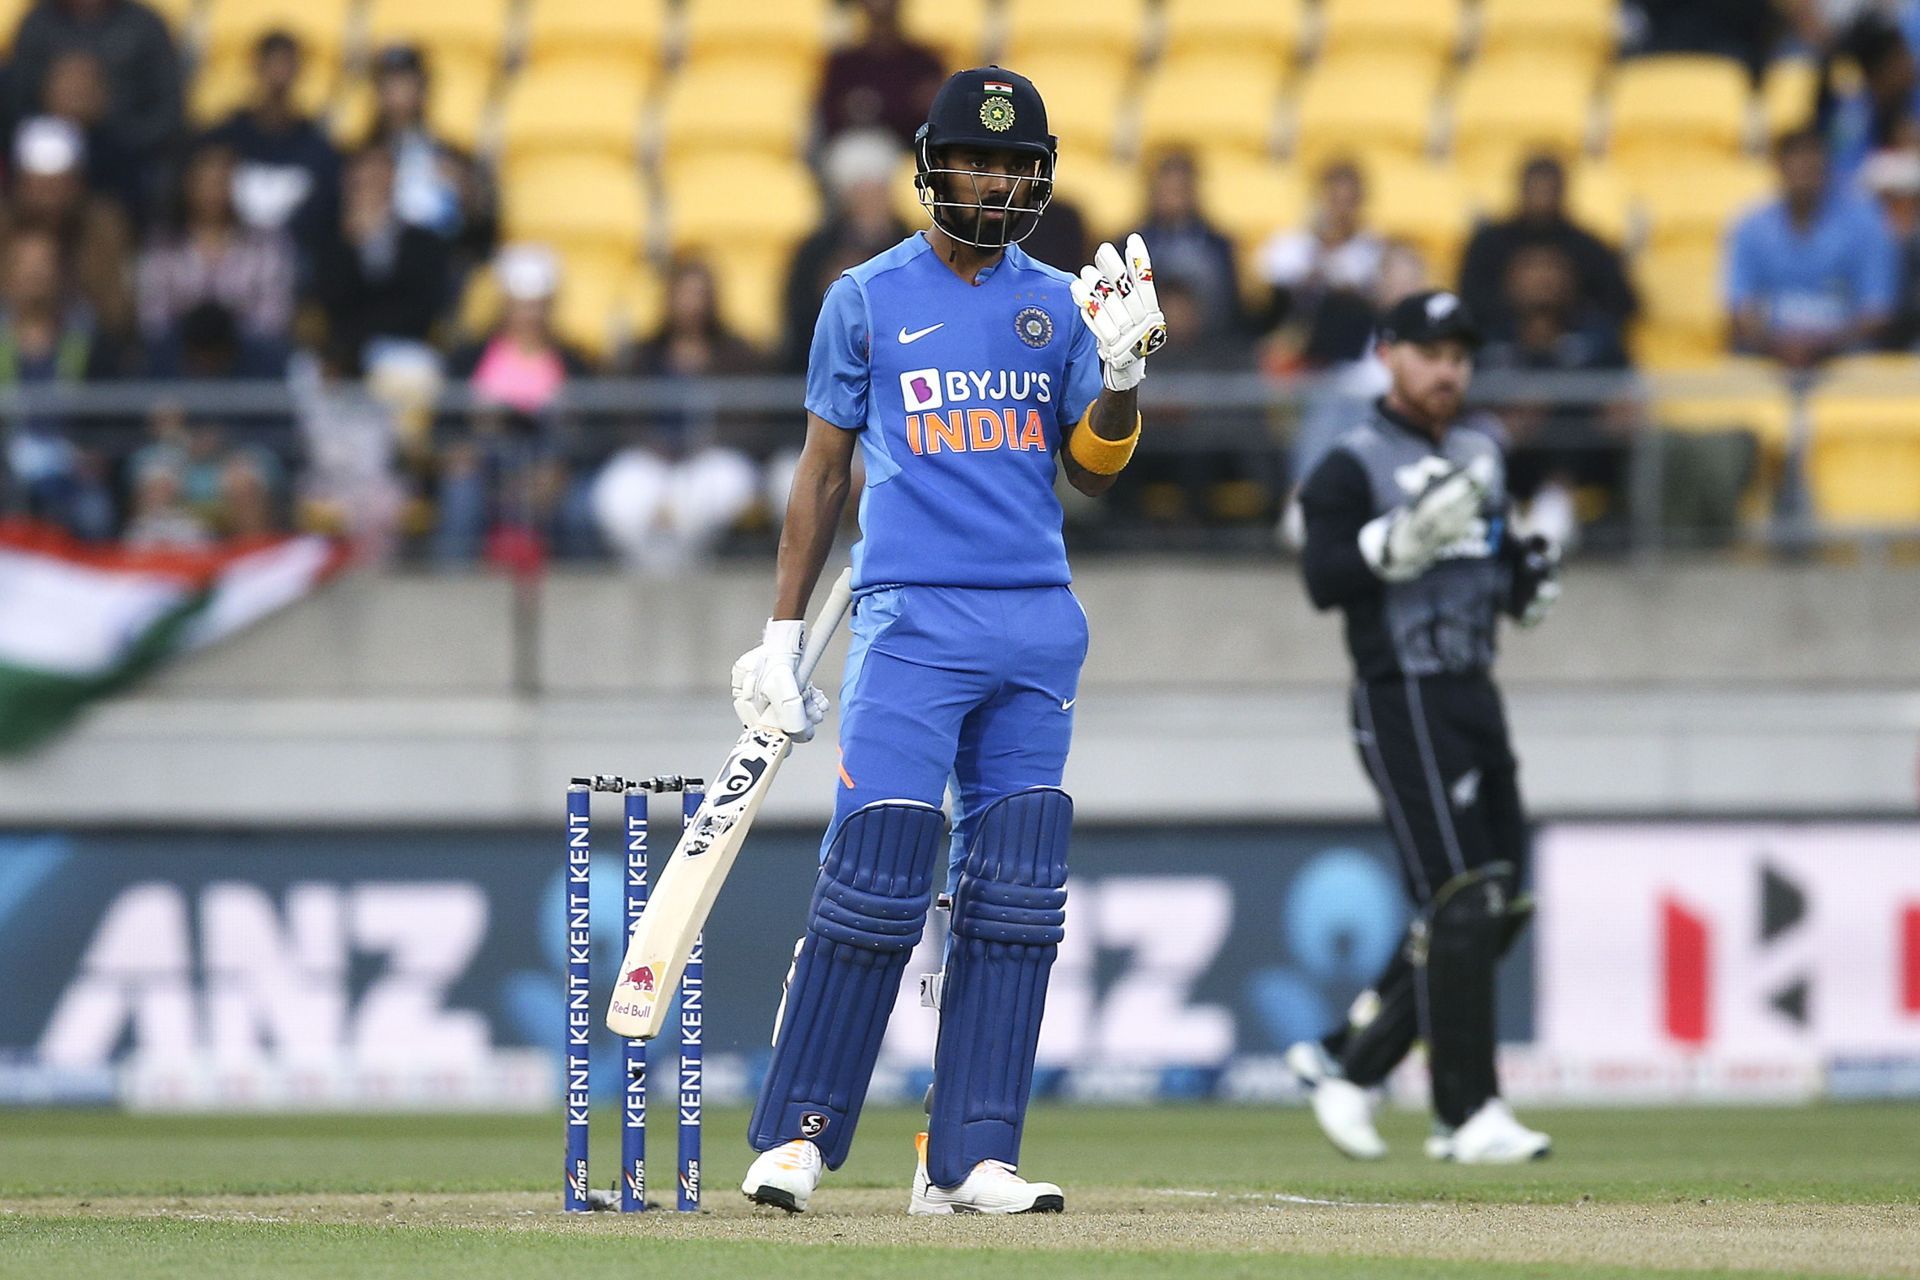 KL Rahul will be the player to look out for in the India vs New Zealand T20I series